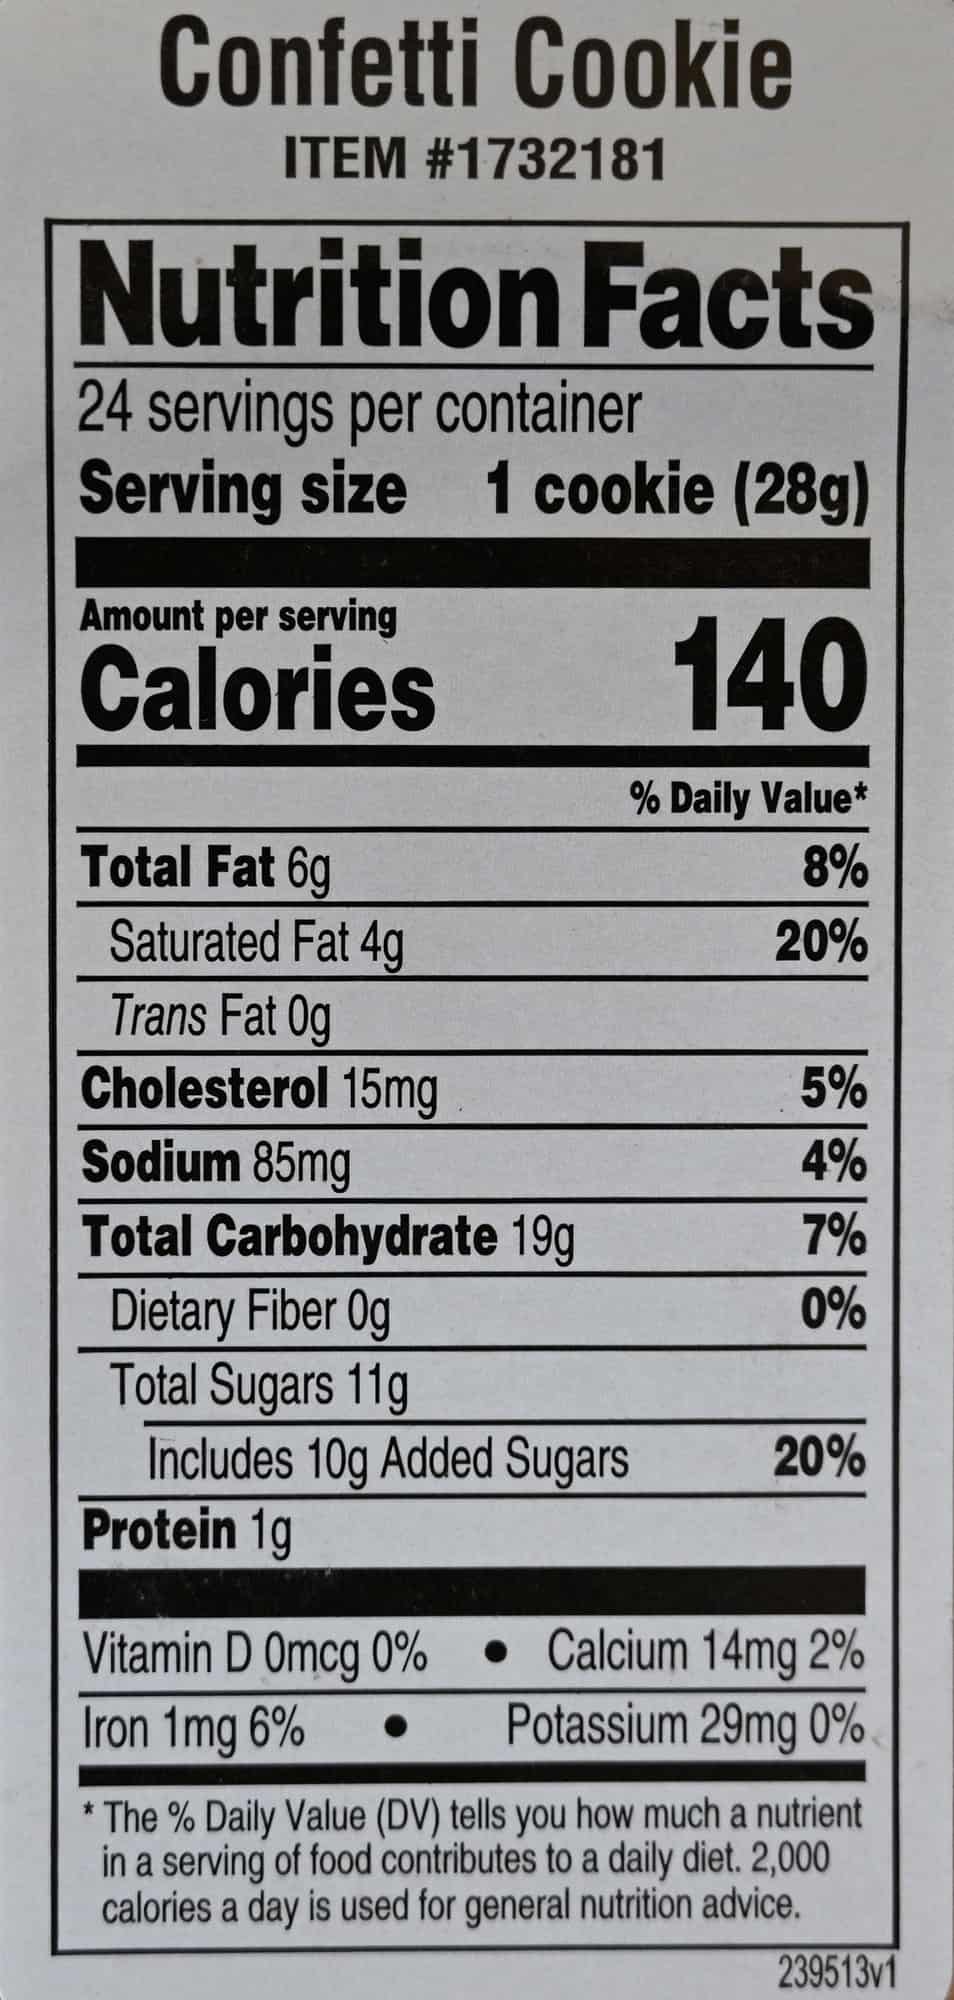 Closeup image of the nutrition facts label for the cookies.